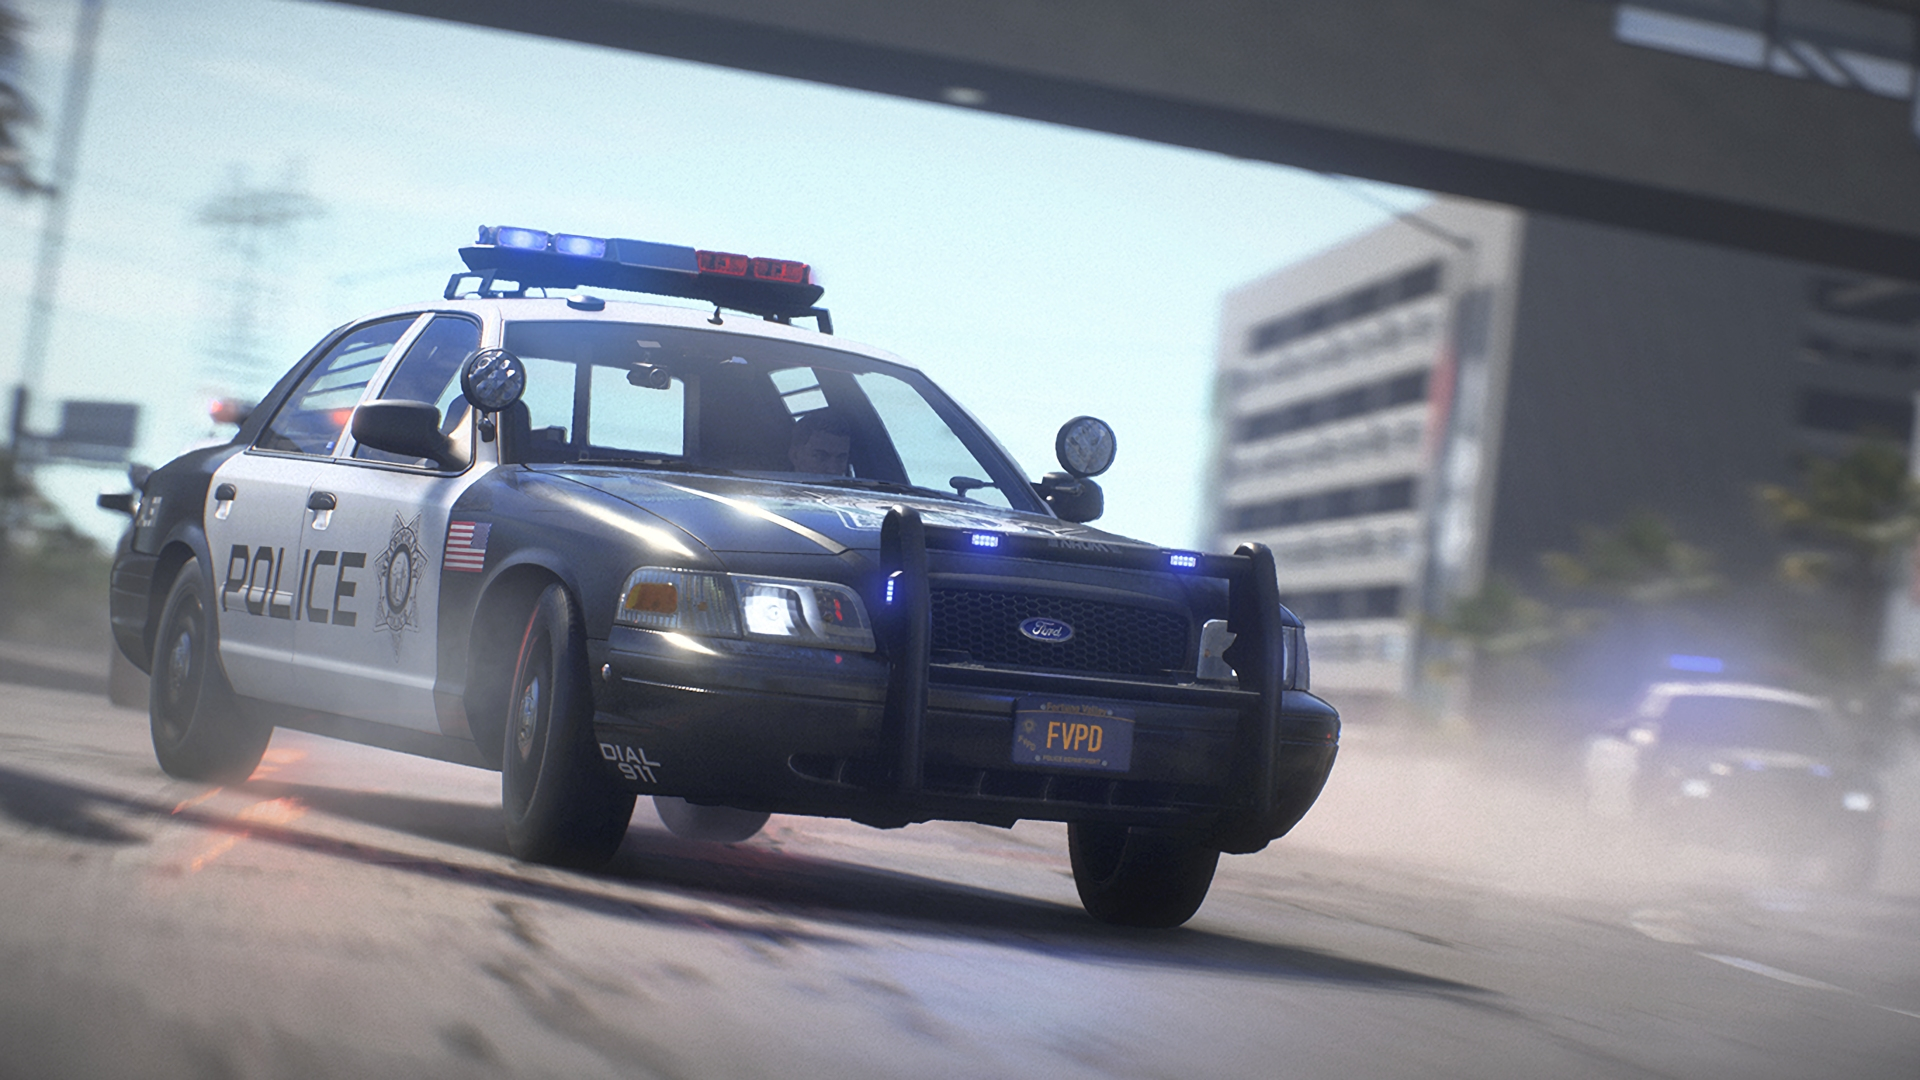 1920x1080 20+ Police Car HD Wallpapers and Backgrounds